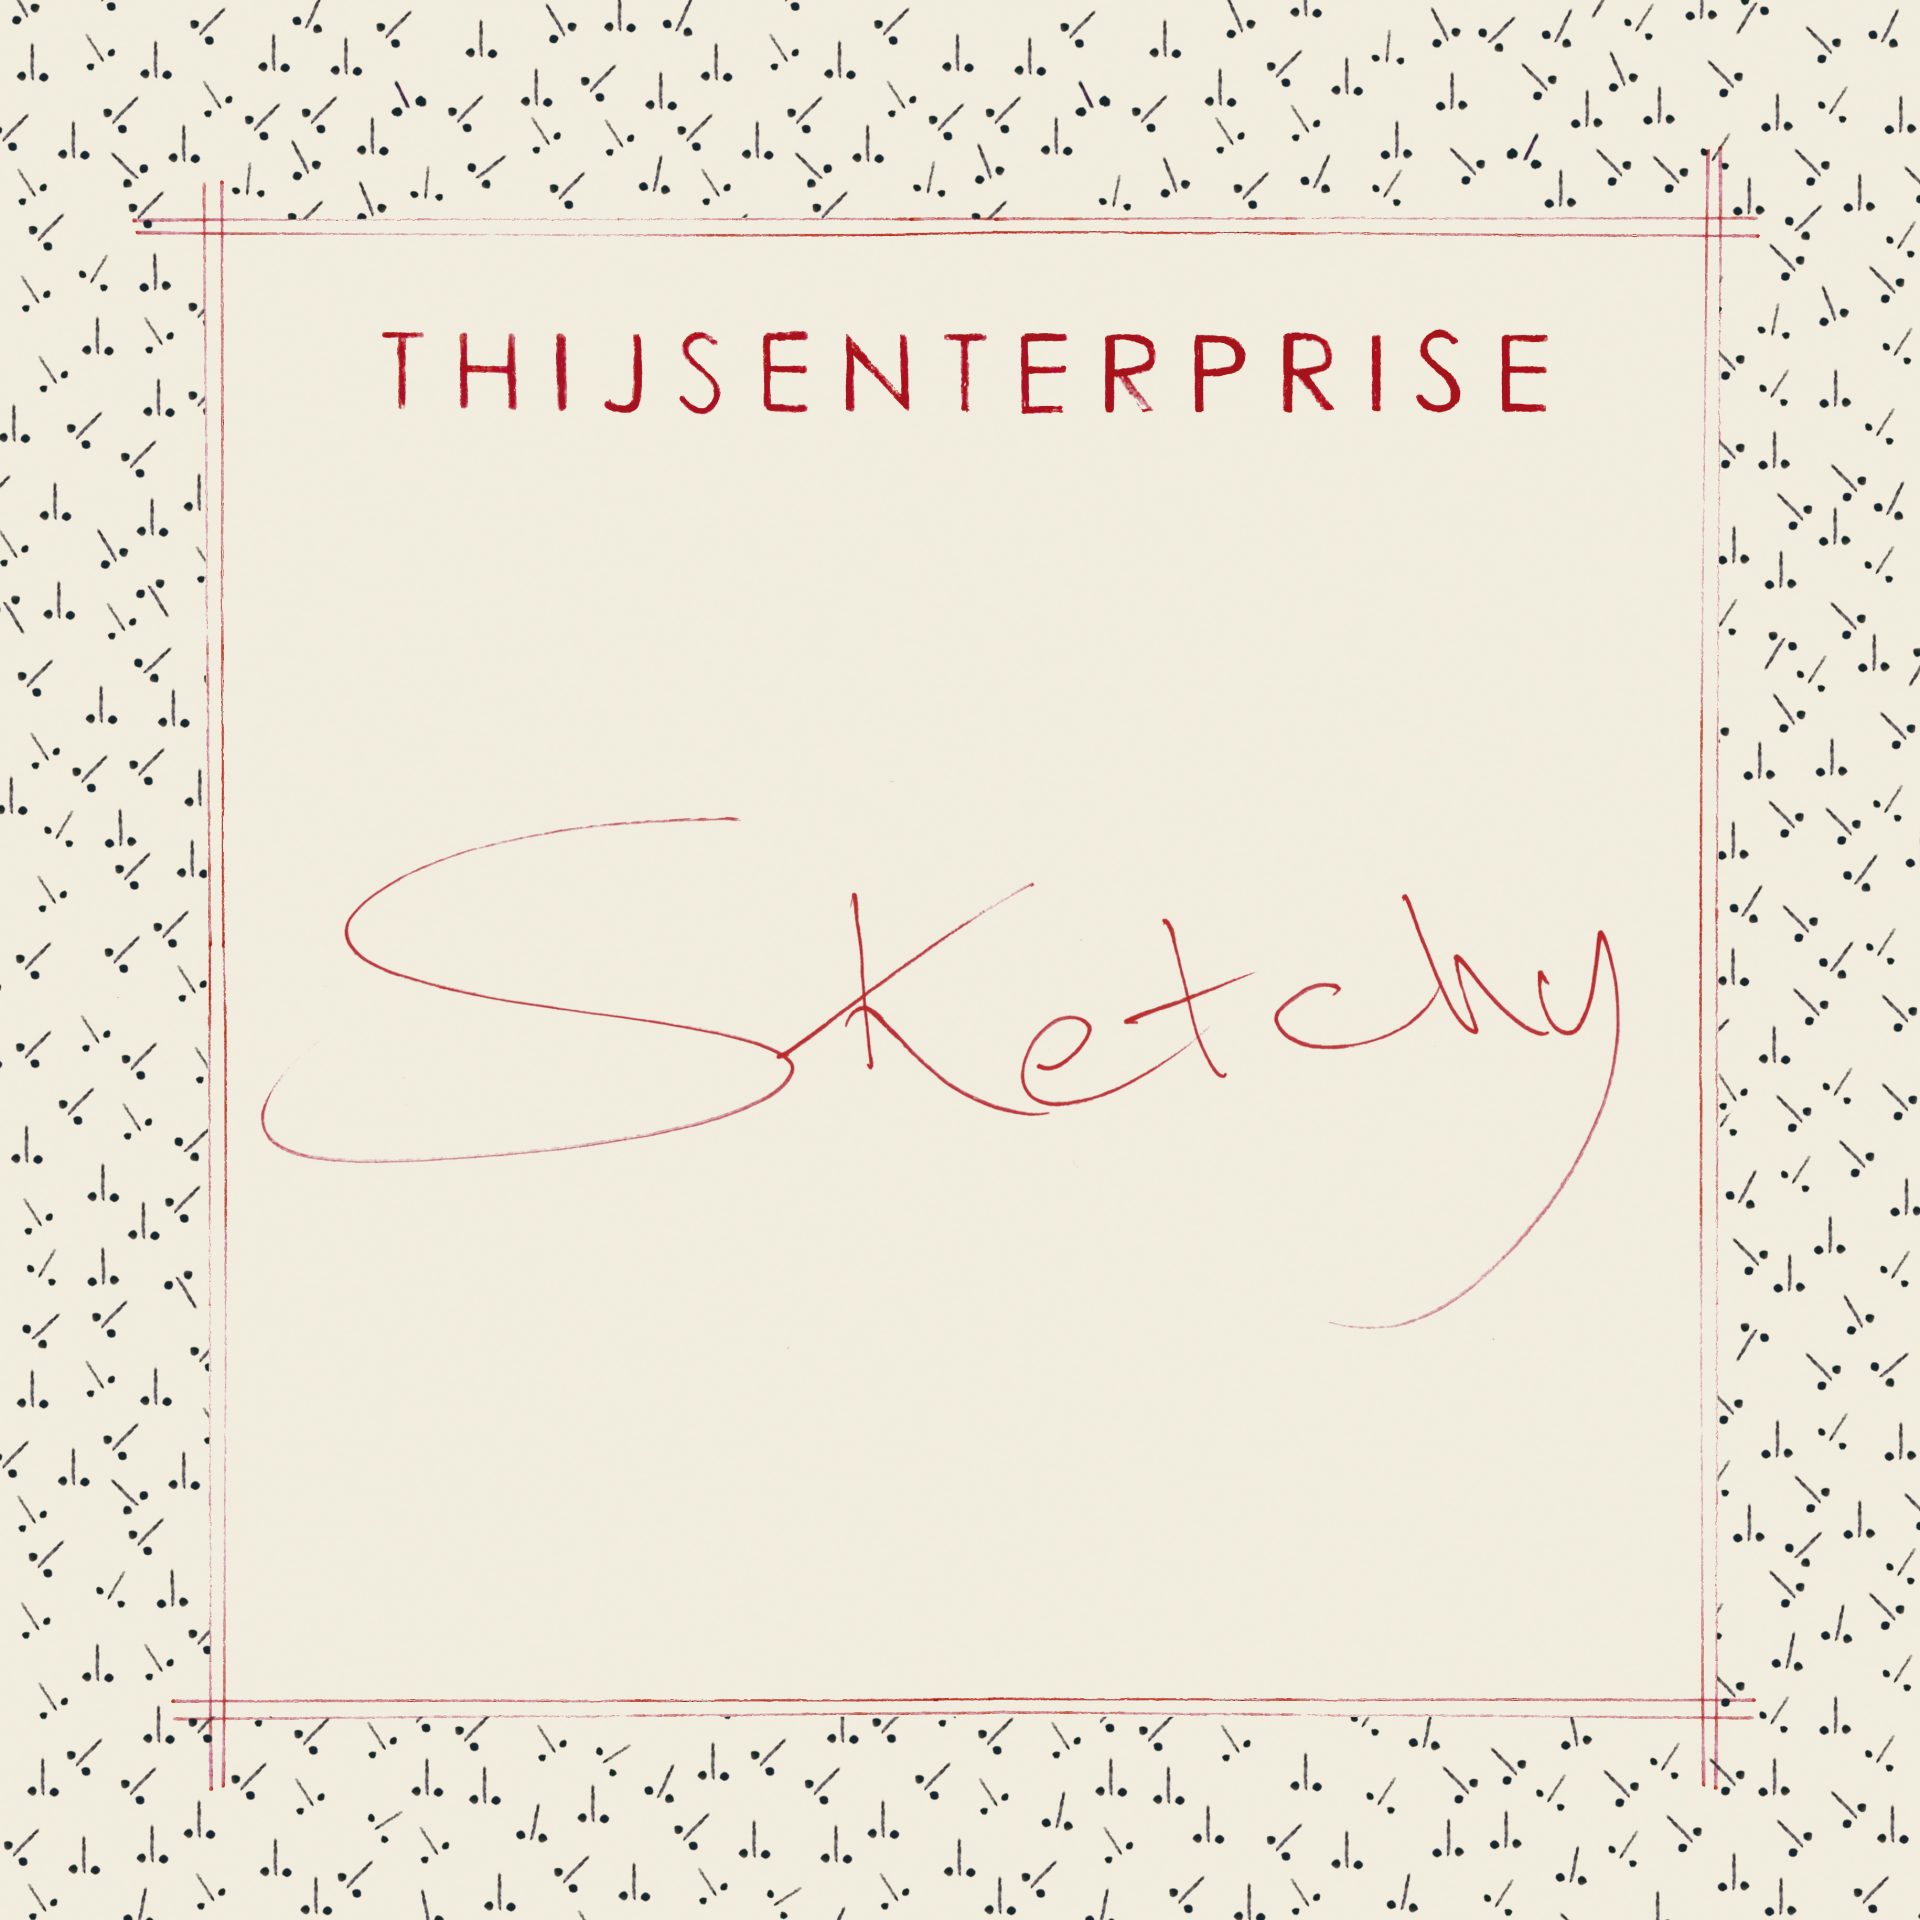 ‘Sketchy’ Skating over a Catchy Groove (New Thijsenterprise)